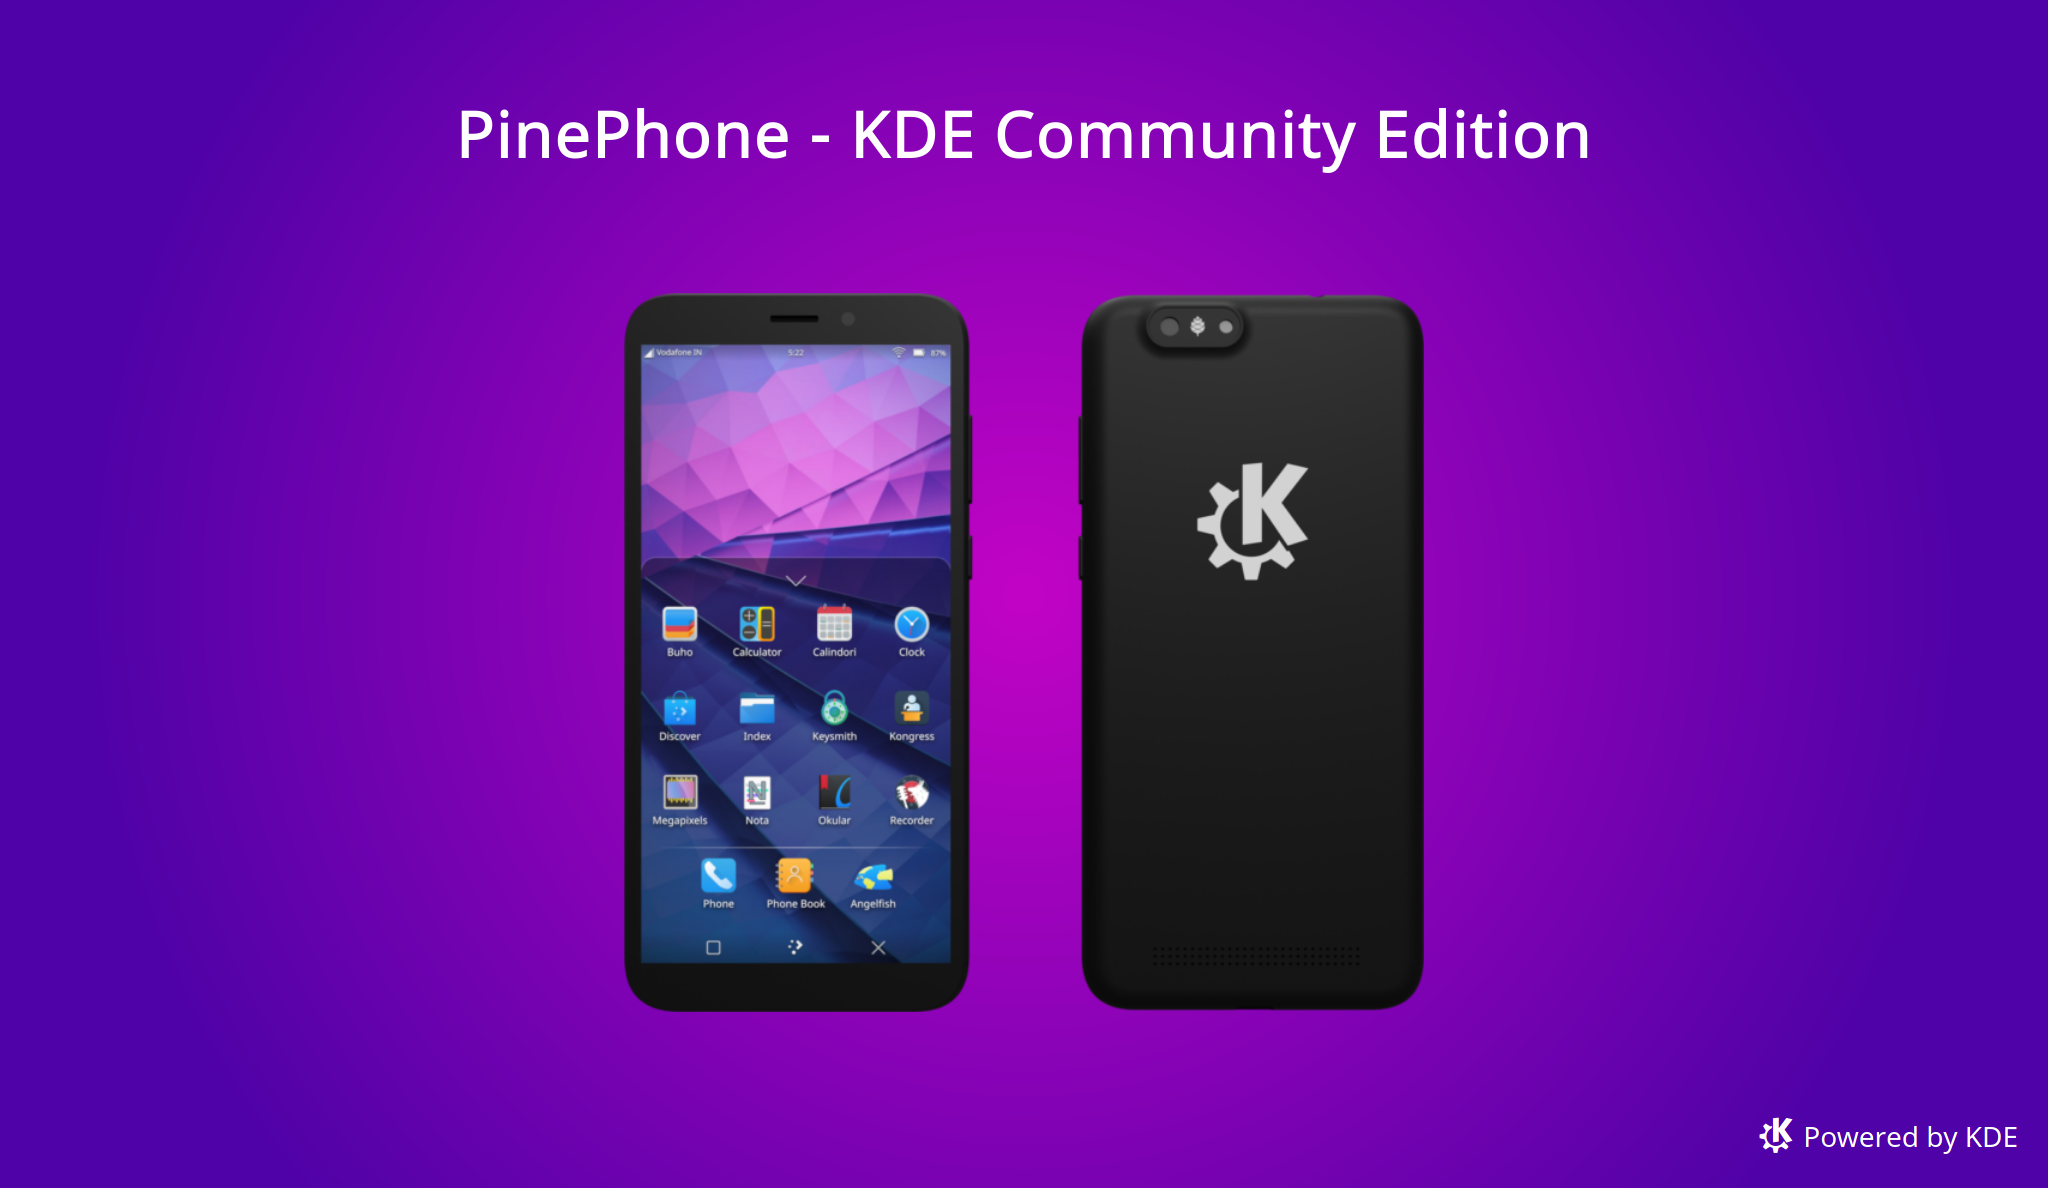 PinePhone Launches the KDE Community Edition For $149